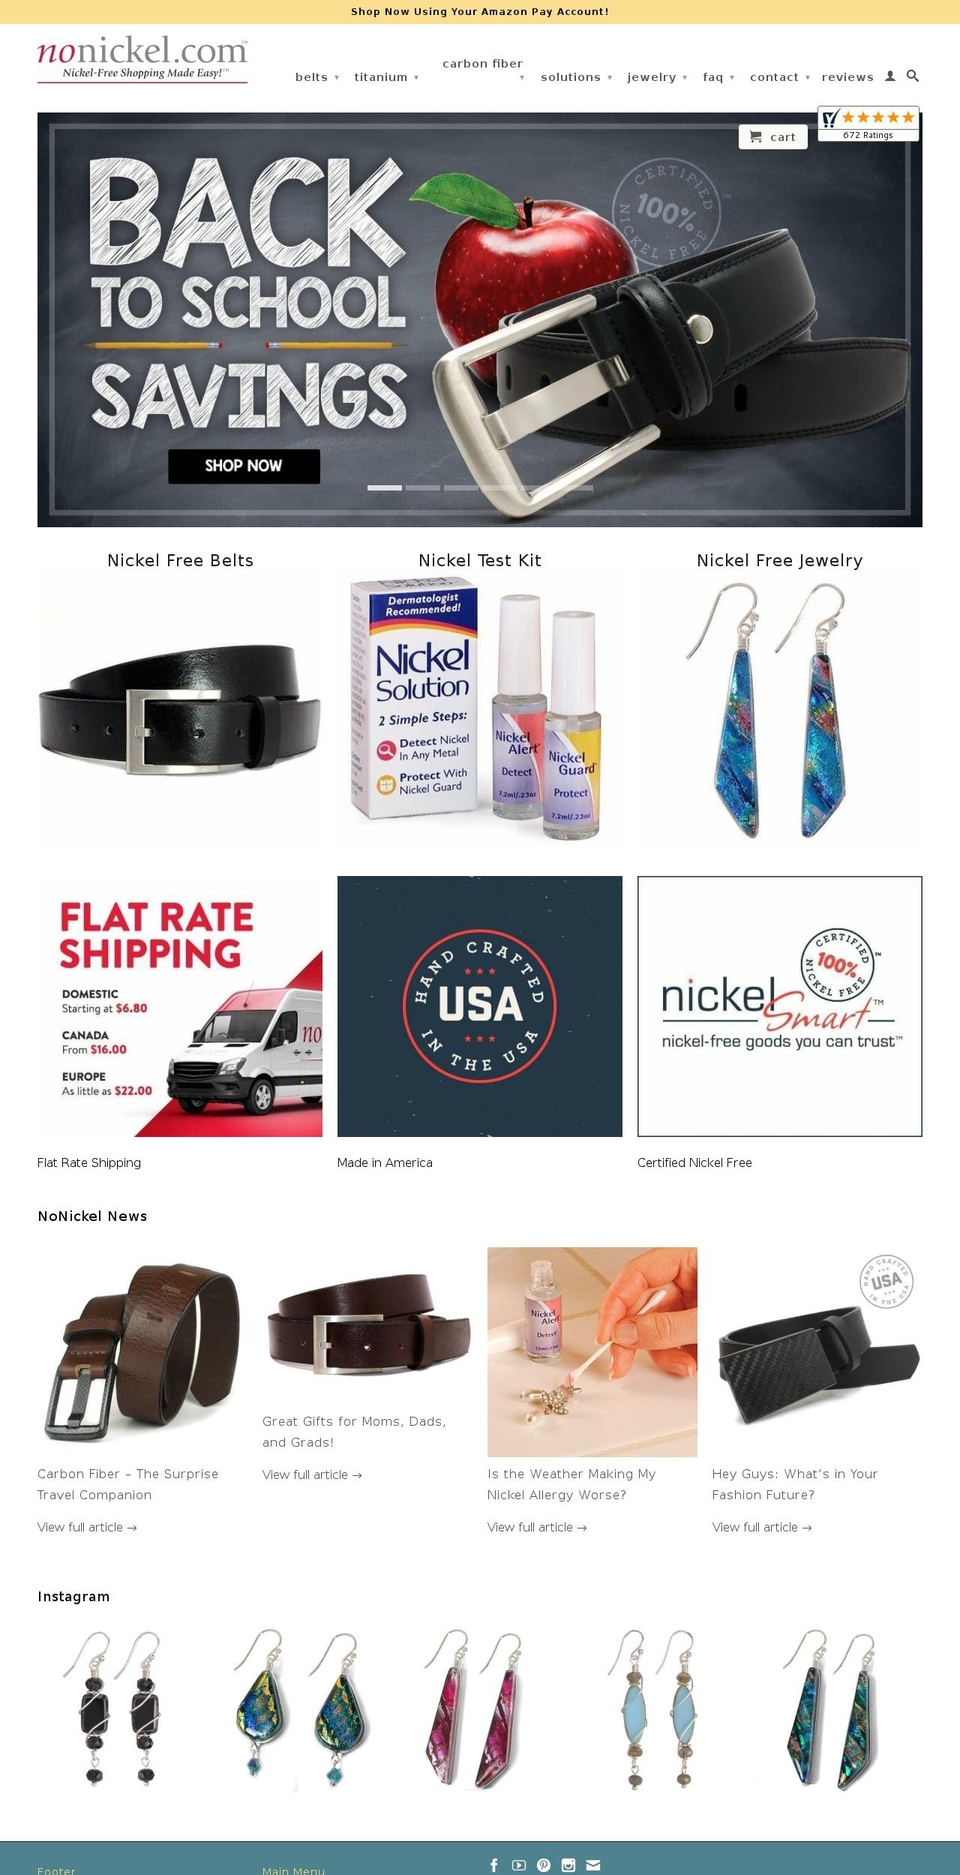 Nonickel-com.02.dev Shopify theme site example nickelfreeoutlet.com